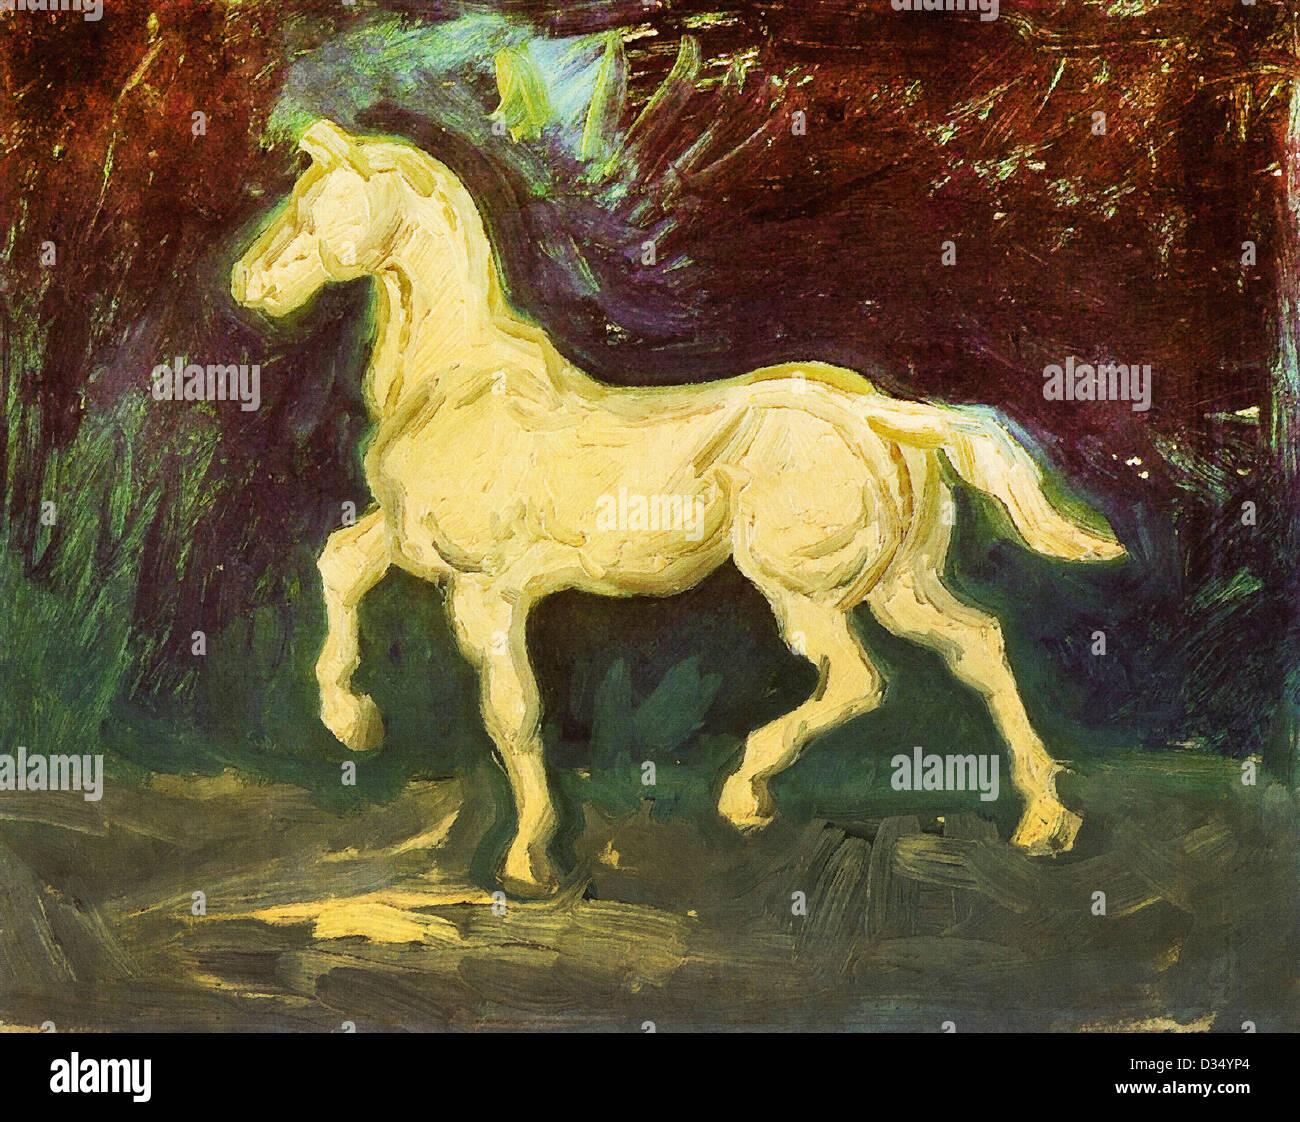 Vincent van Gogh, Plaster Statuette of a Horse. 1886. Post-Impressionism. Oil on cardboard.  Van Gogh Museum, Amsterdam Stock Photo